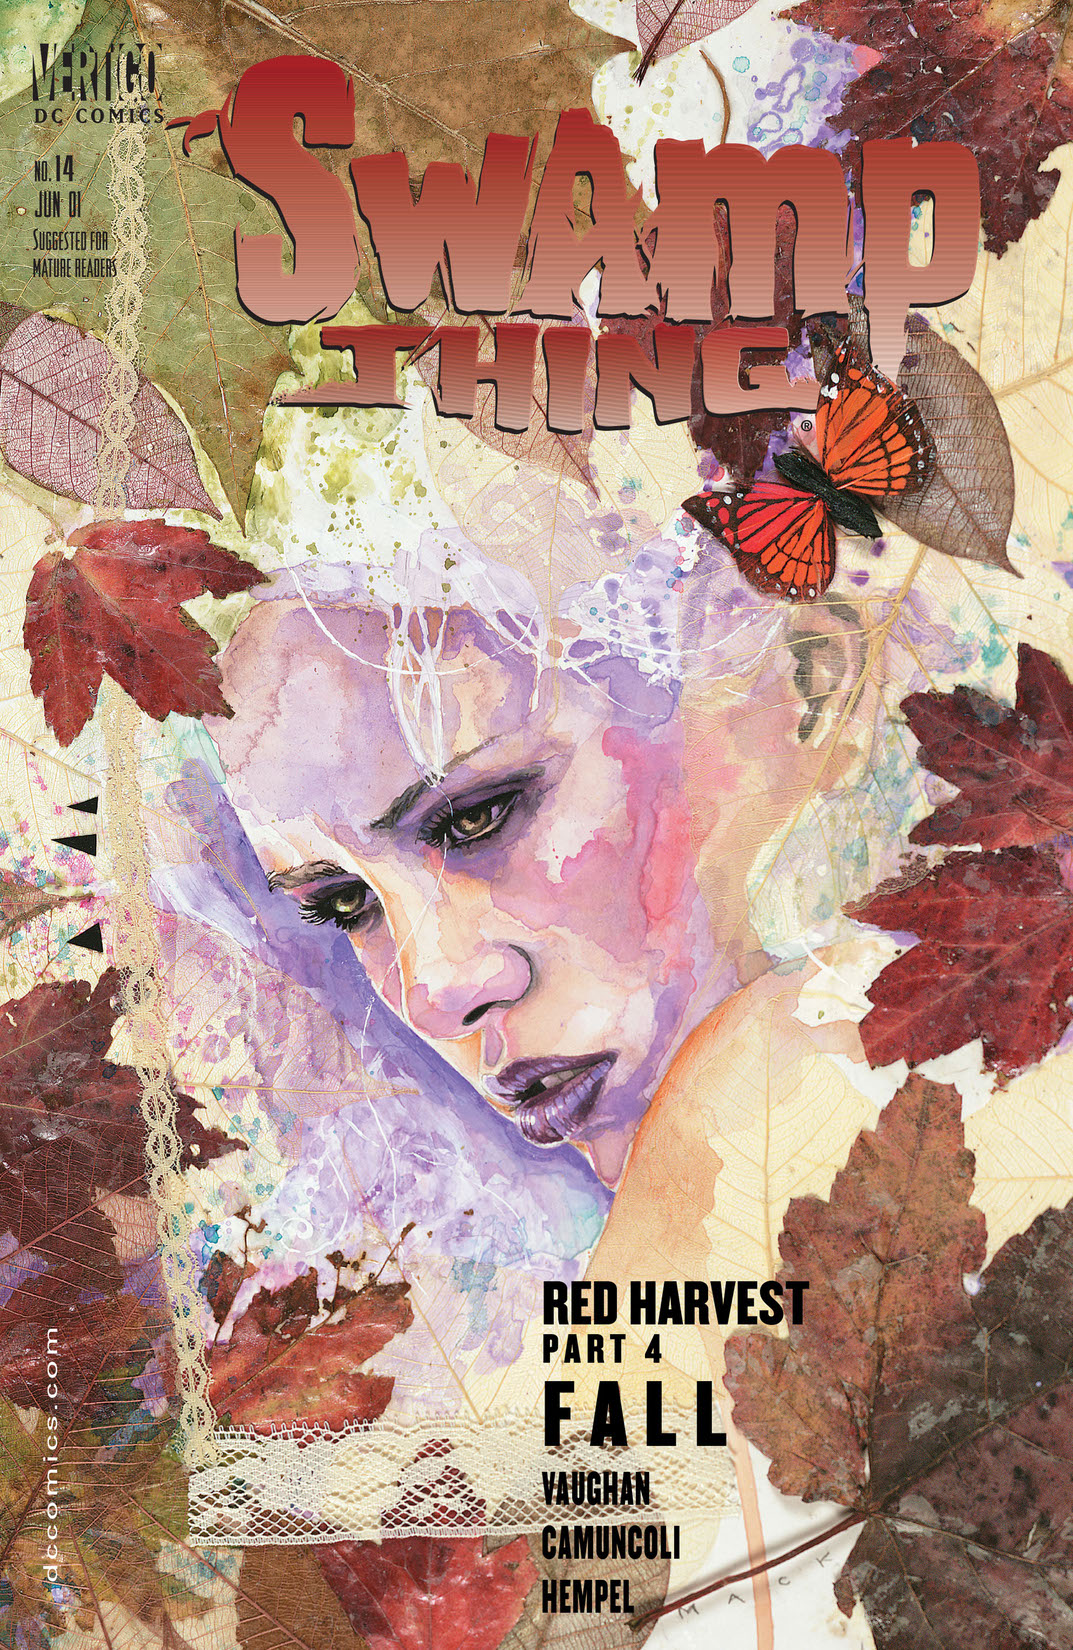 Swamp Thing (2000-) #14 preview images